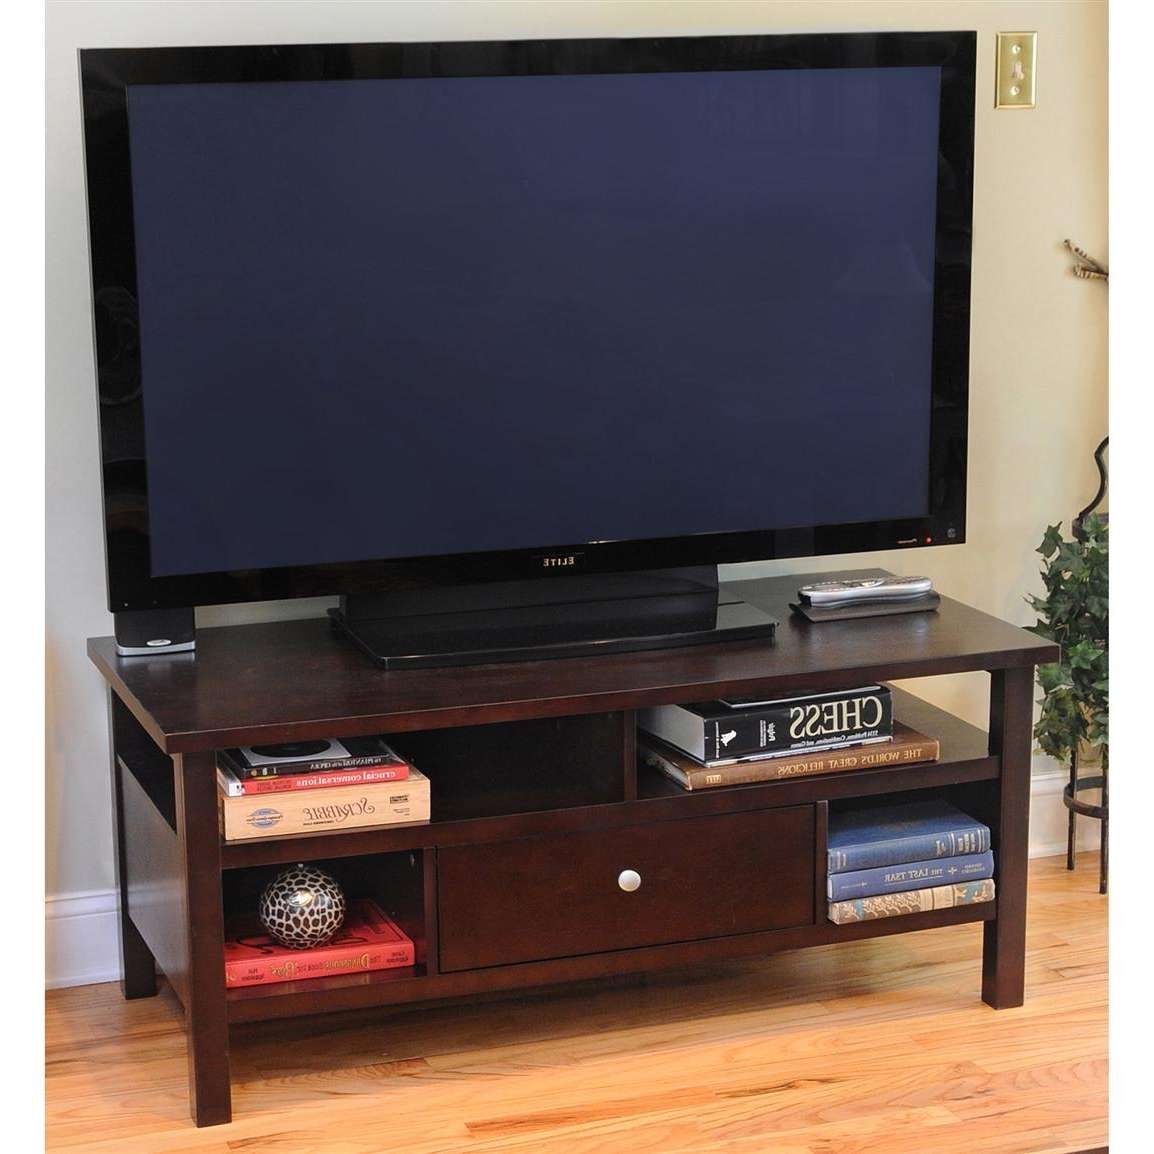 Furnitures Awesome Flat Screen Tv Stands Wood Canadian Tire Pertaining To Wooden Tv Stands With Wheels (View 6 of 15)